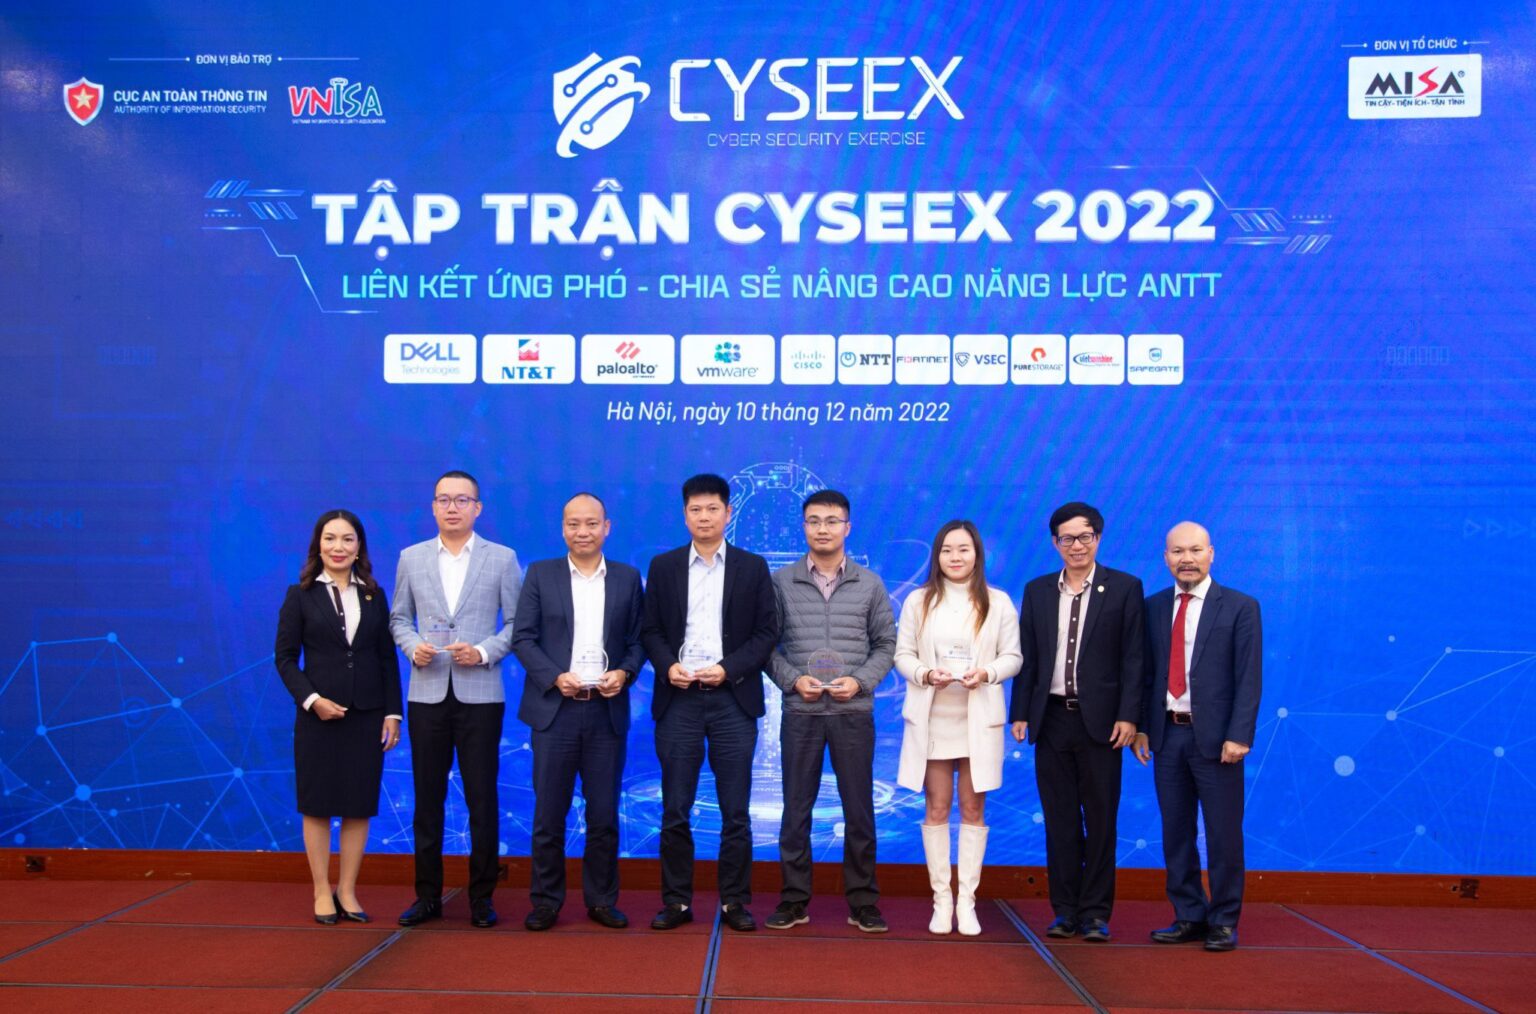 Cyber security exercise event: VSEC ACCOMPANIES “CYSEEX COALITION 2022”